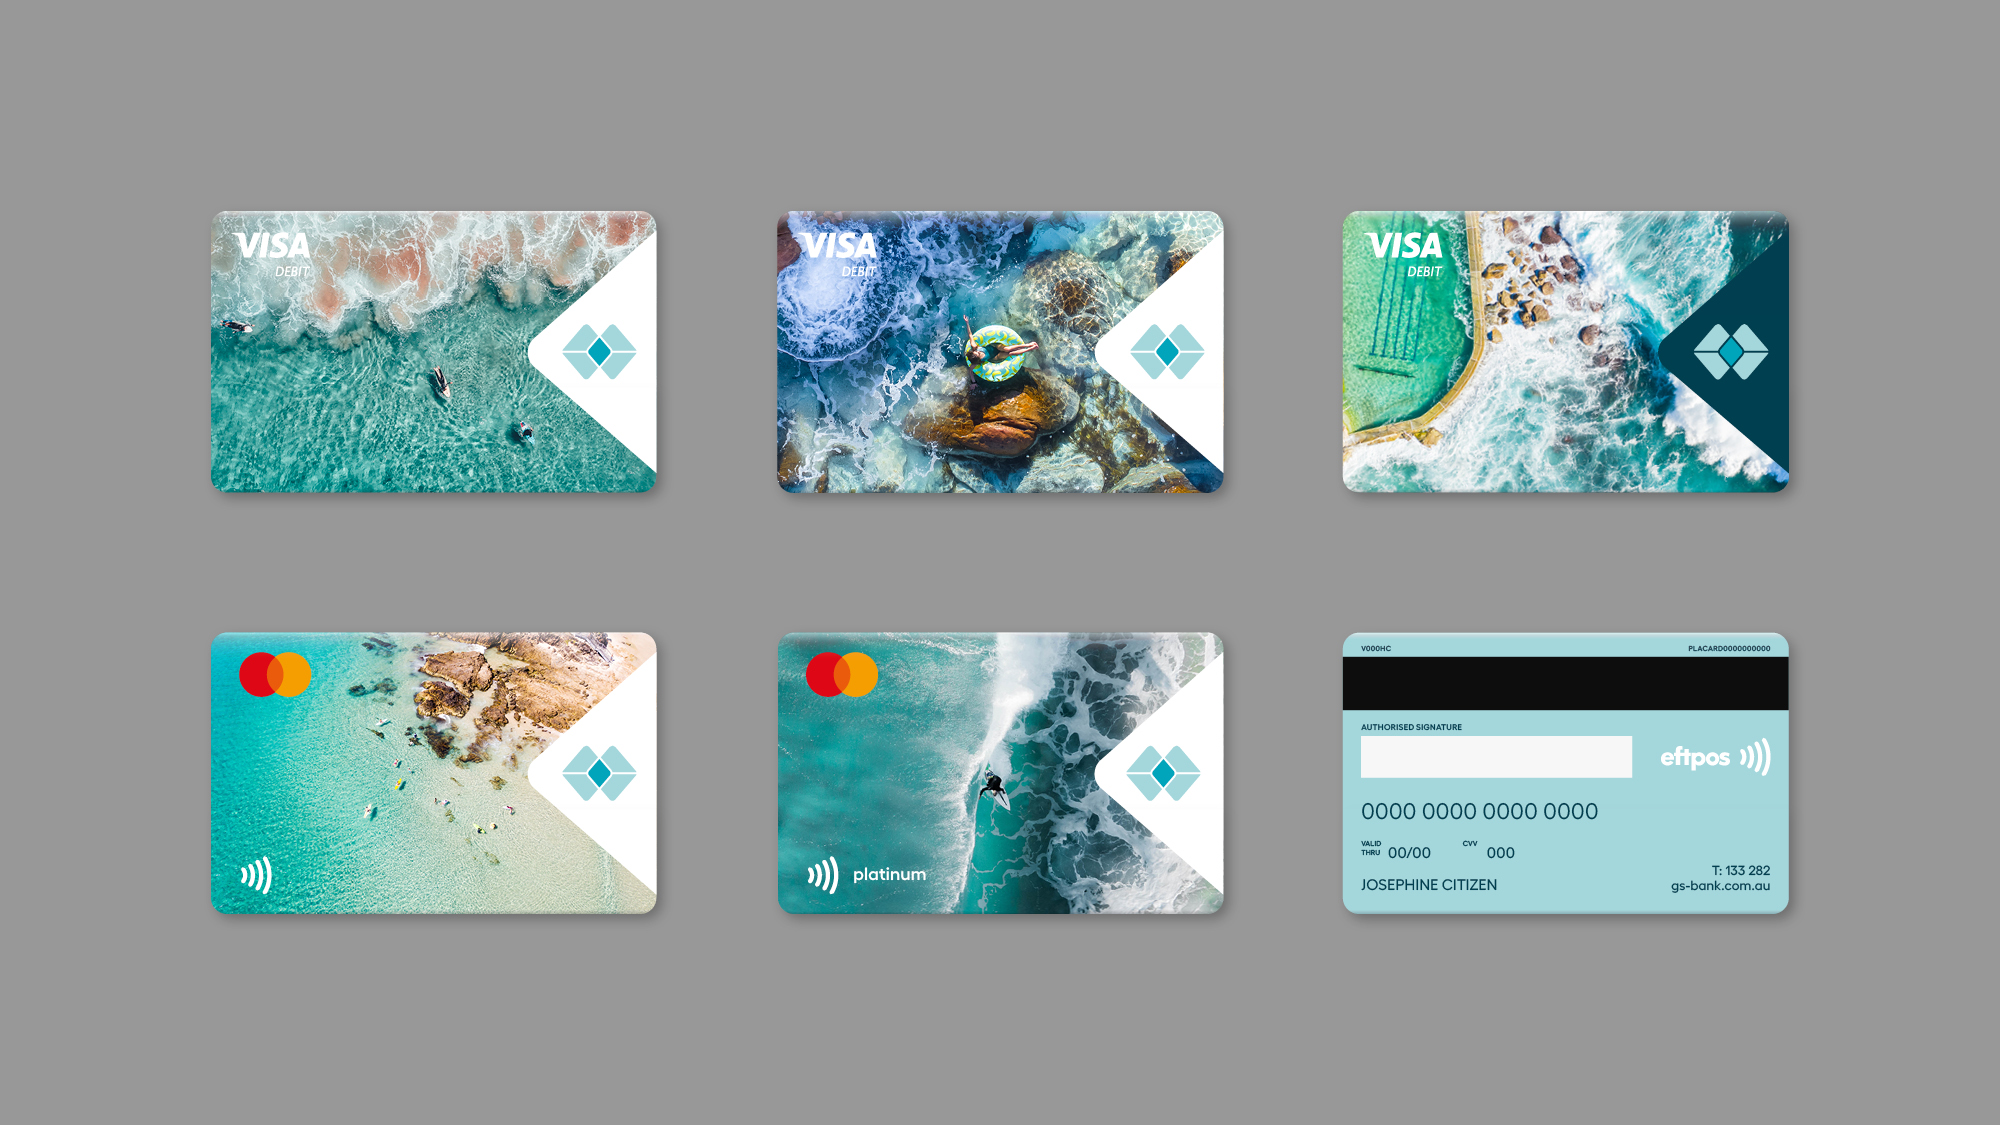 Entity-3-Three-Brand-Design-Agency-Sydney-Great-Southern-Bank-2-print-experience-debit-cards